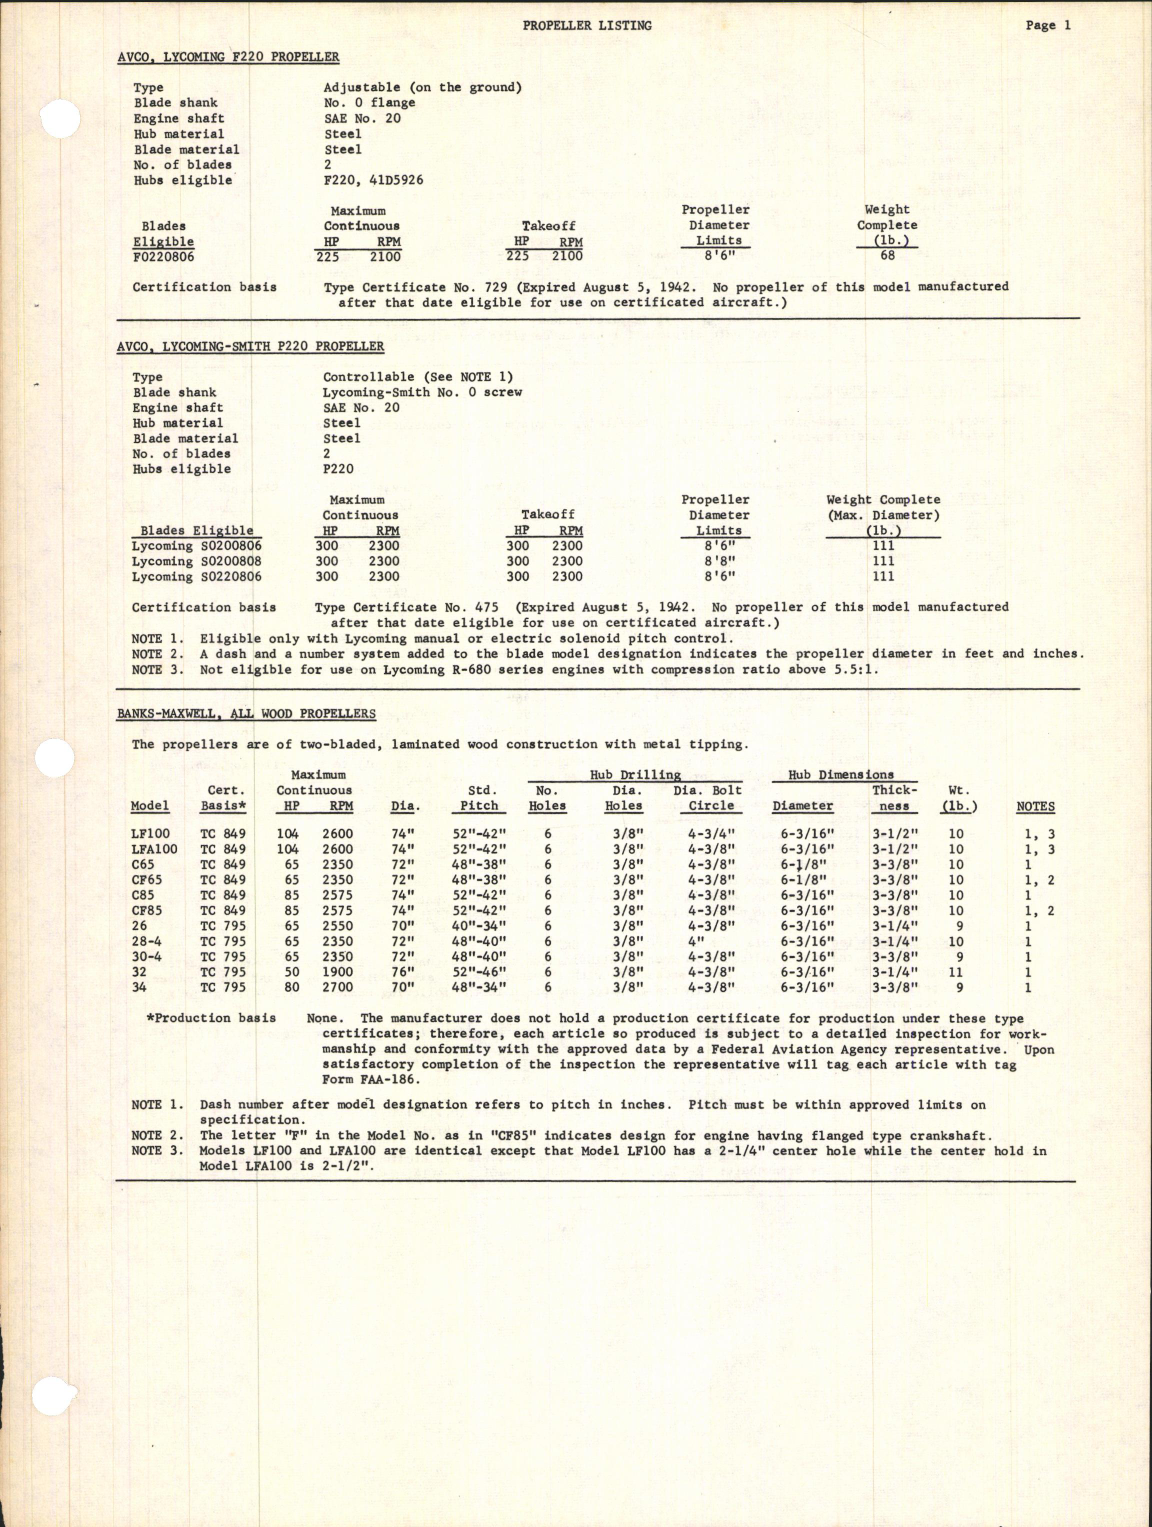 Sample page 5 from AirCorps Library document: Propeller Listing